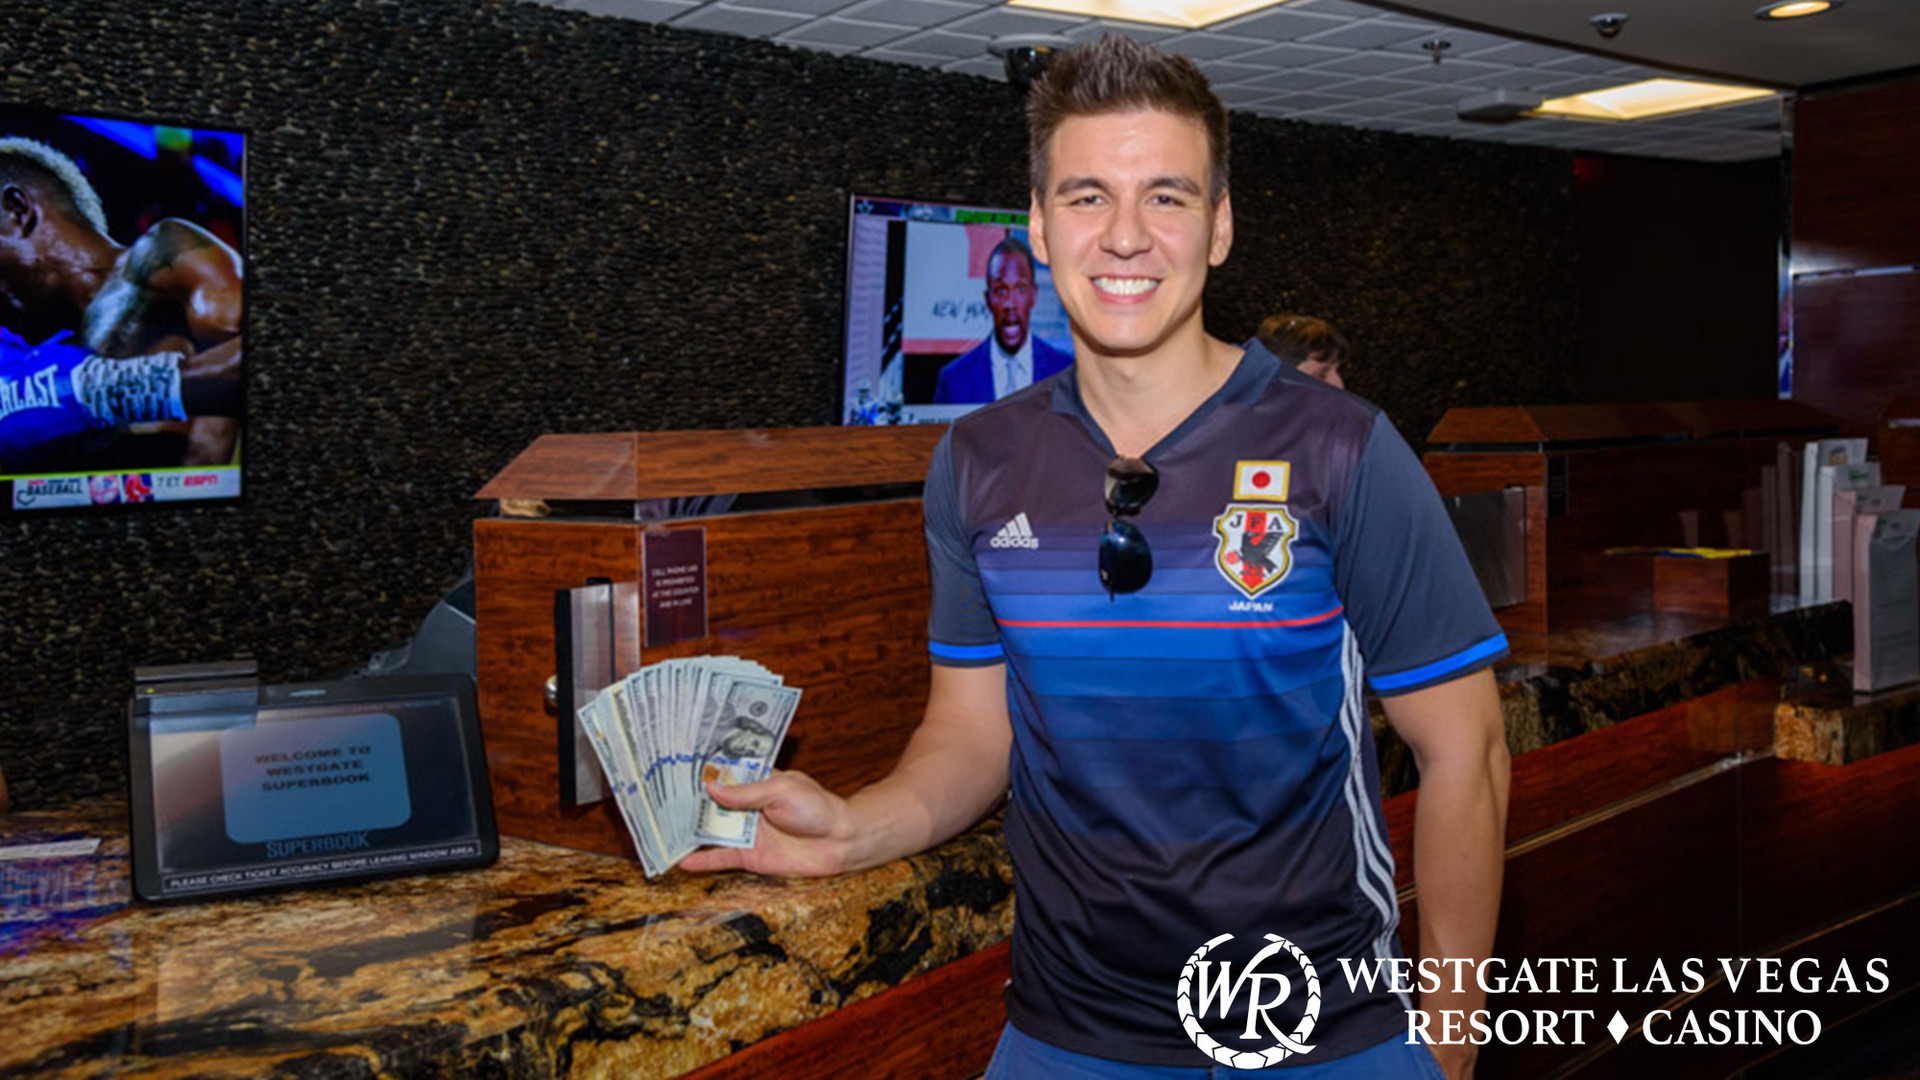 Jeopardy! Champ James Holzhauer To Enter 2019 Westgate SuperContest® | Westgate SuperContest®